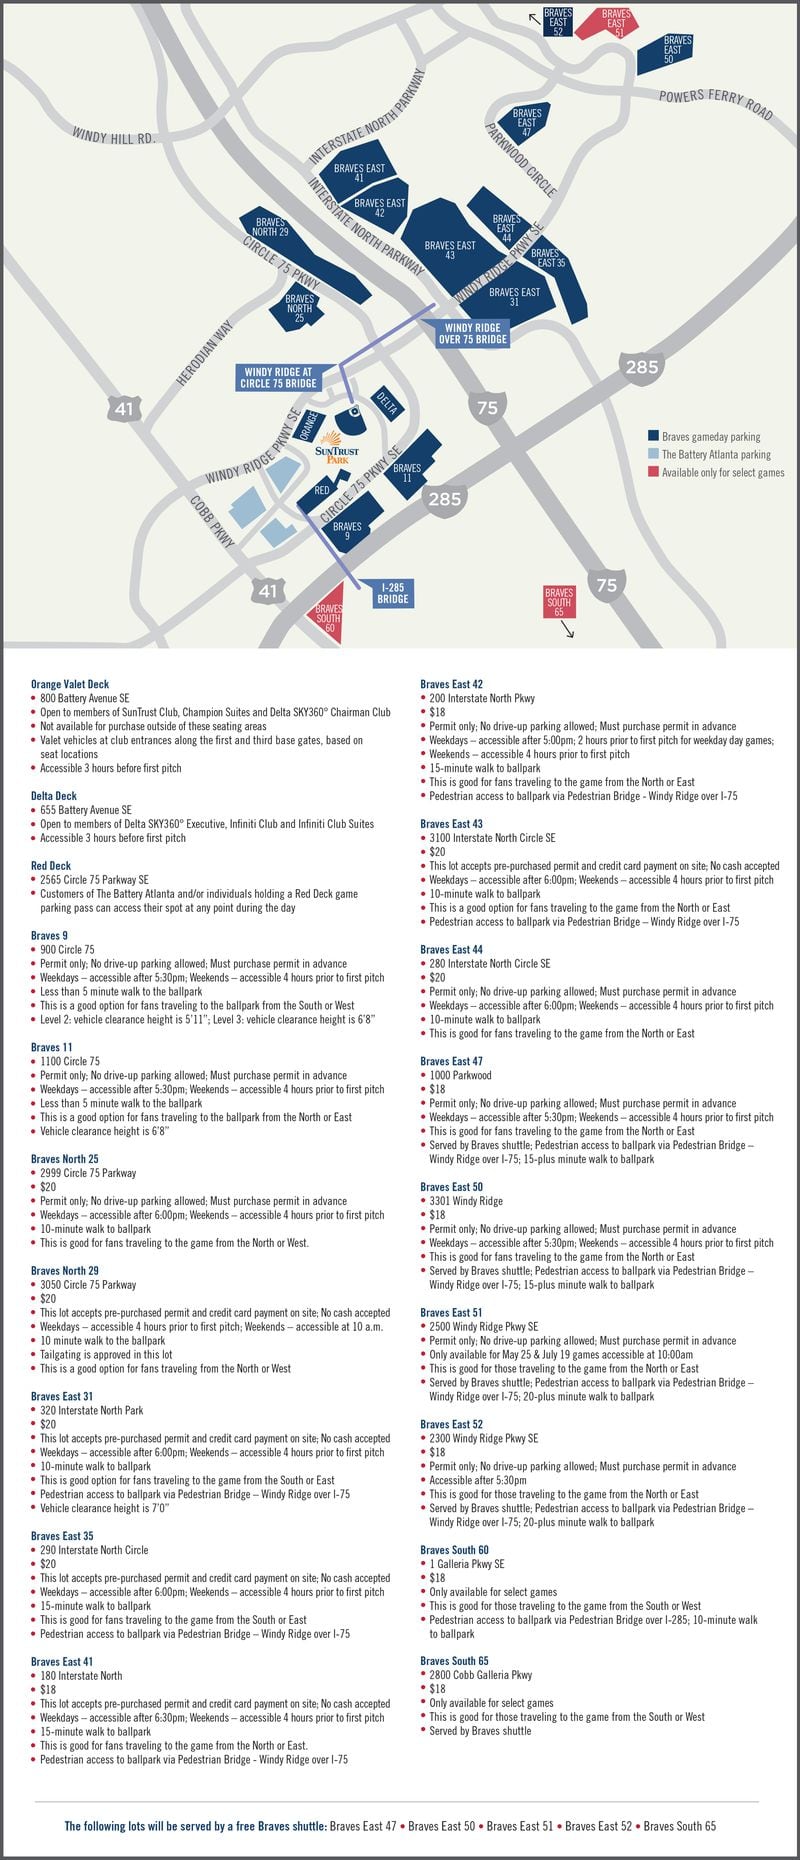 The Atlanta Braves have released a parking plan for SunTrust Park, the new stadium in Cobb County. There are about 14,000 parking spots near SunTrust Park, compared to Turner Field’s almost 8,700 spaces. Some lots are reserved for season-ticket holders while others are public.